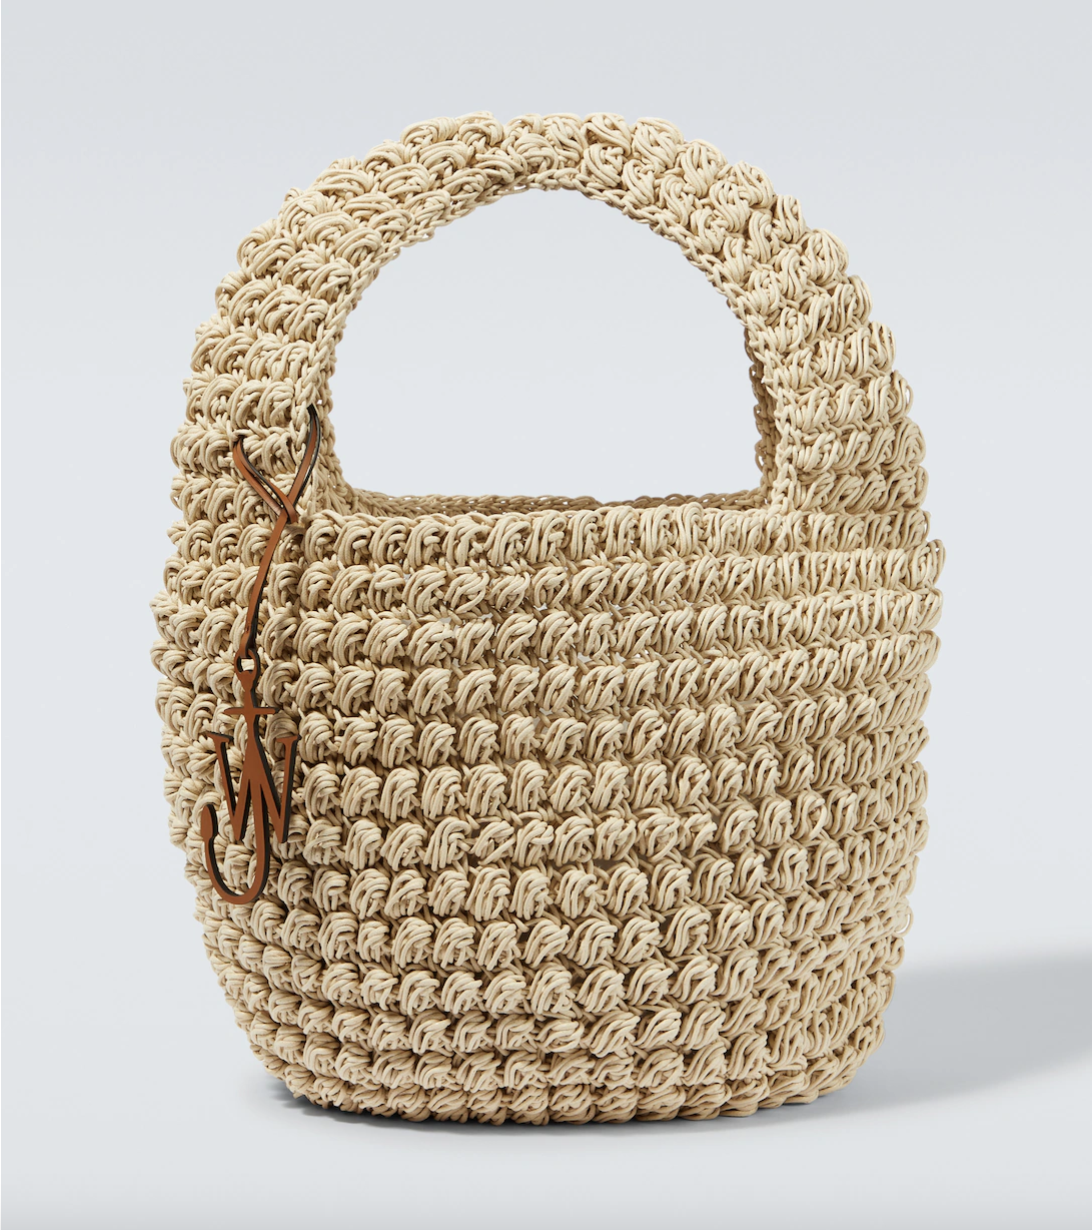 The Wick - Popcorn tote bag by JW Anderson